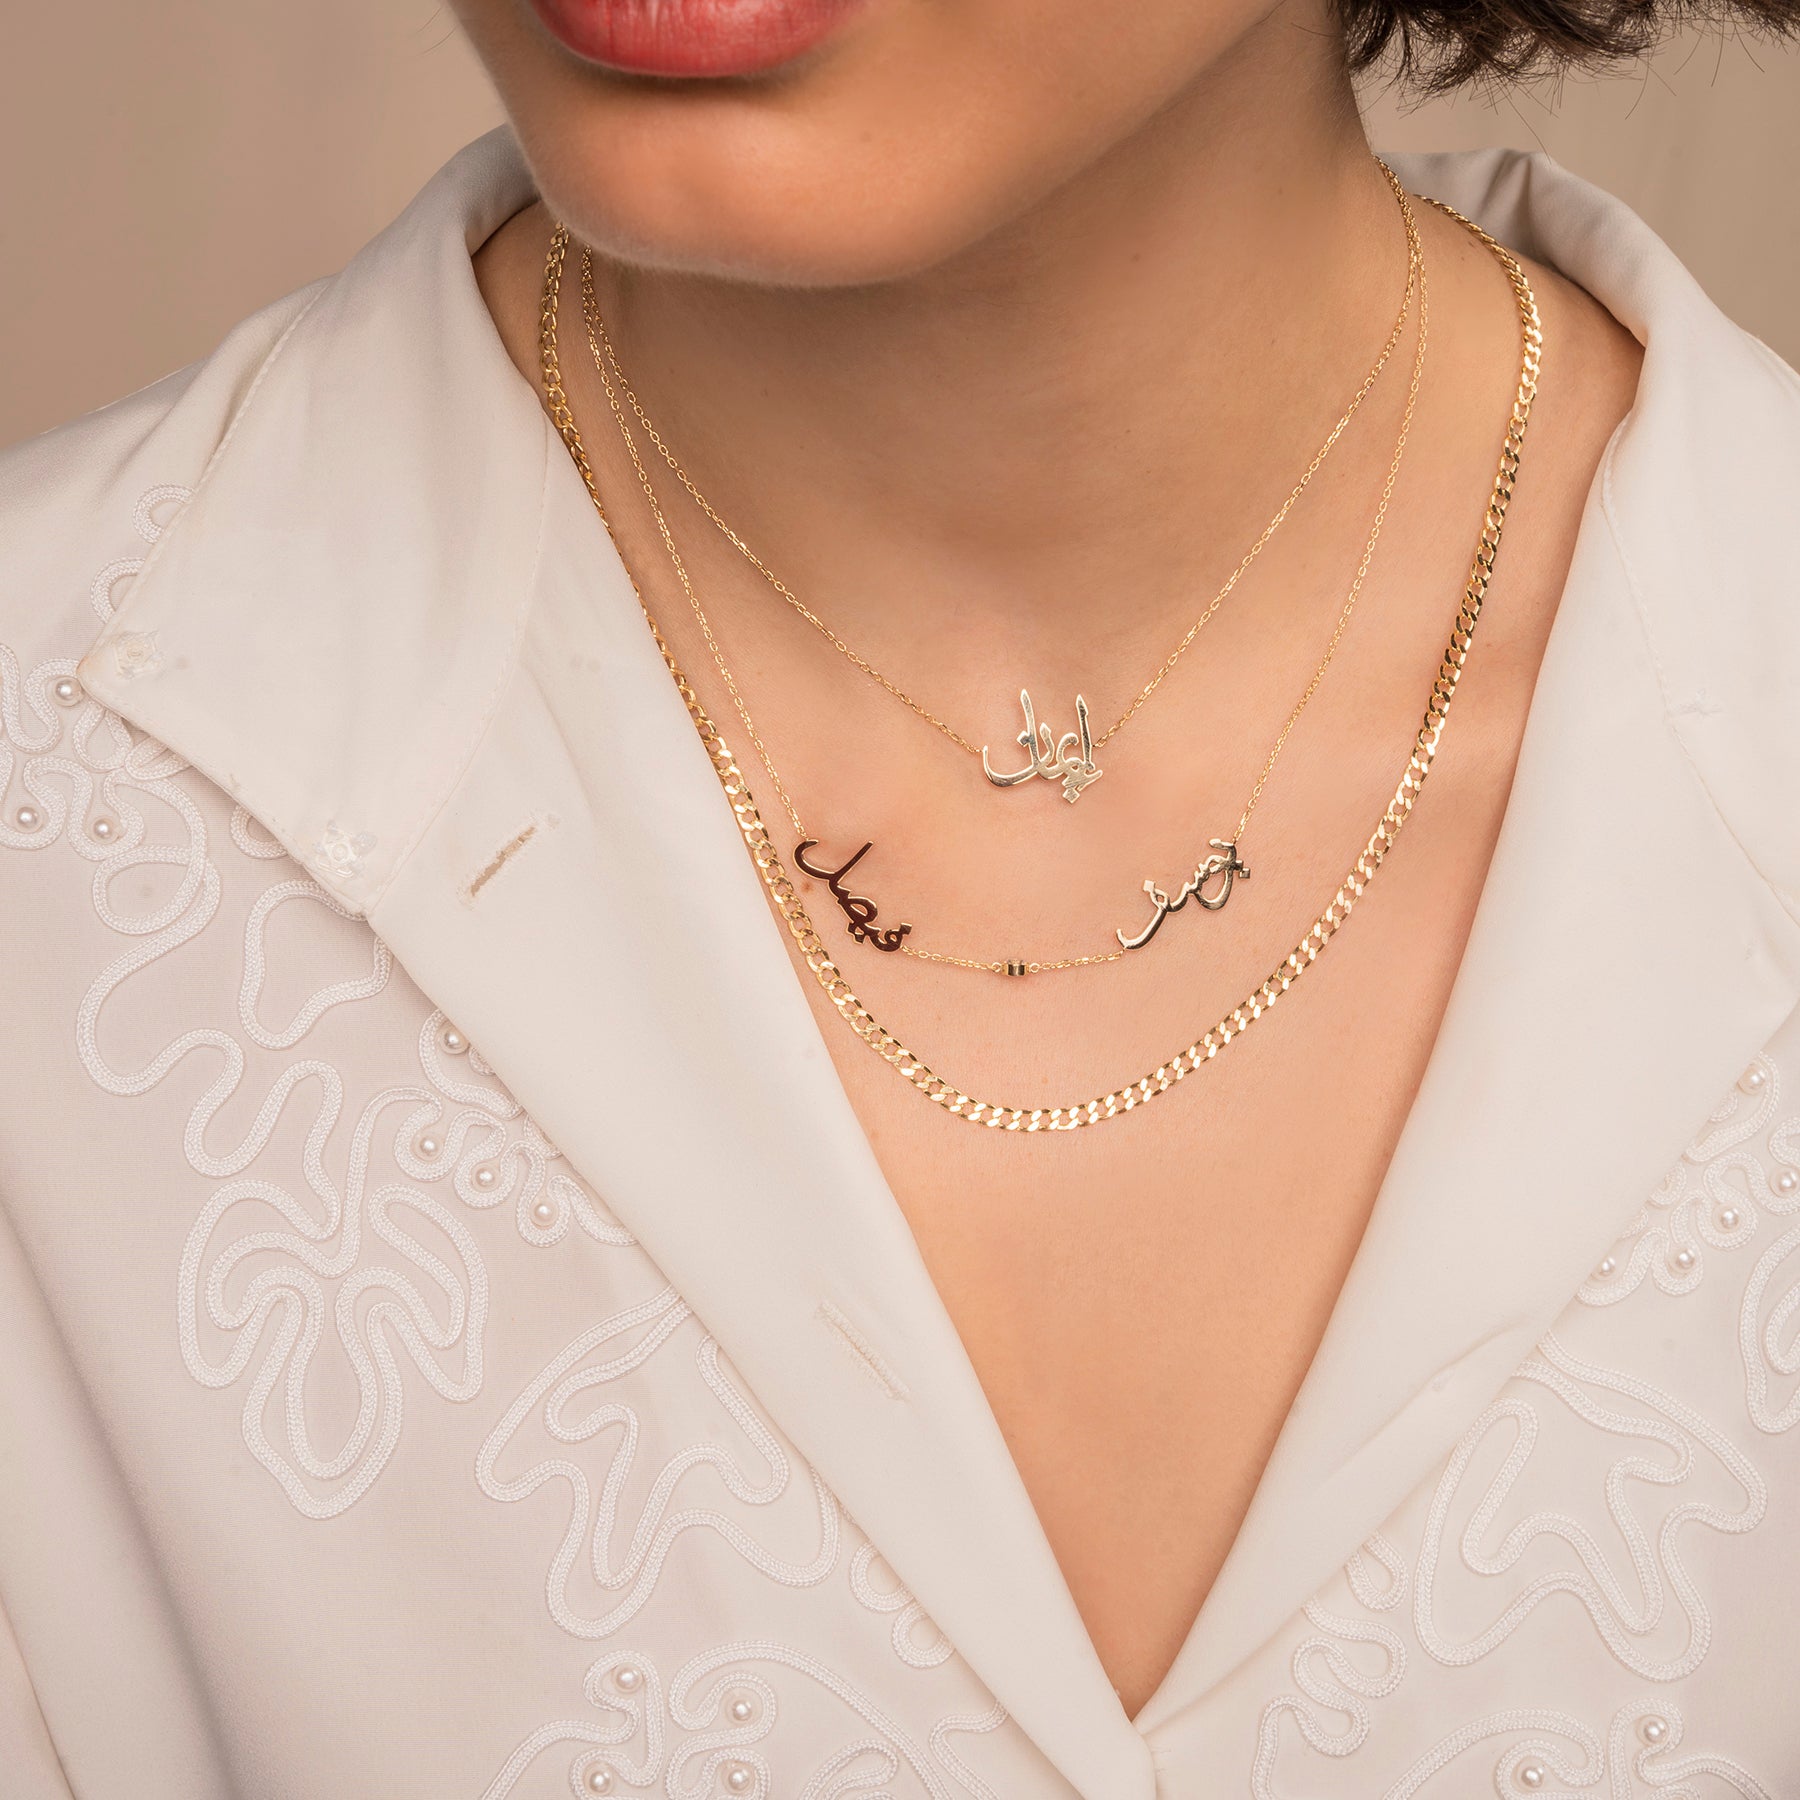 Personalized Arabic Name Necklace in 18k Gold Plated - CamillaBoutique